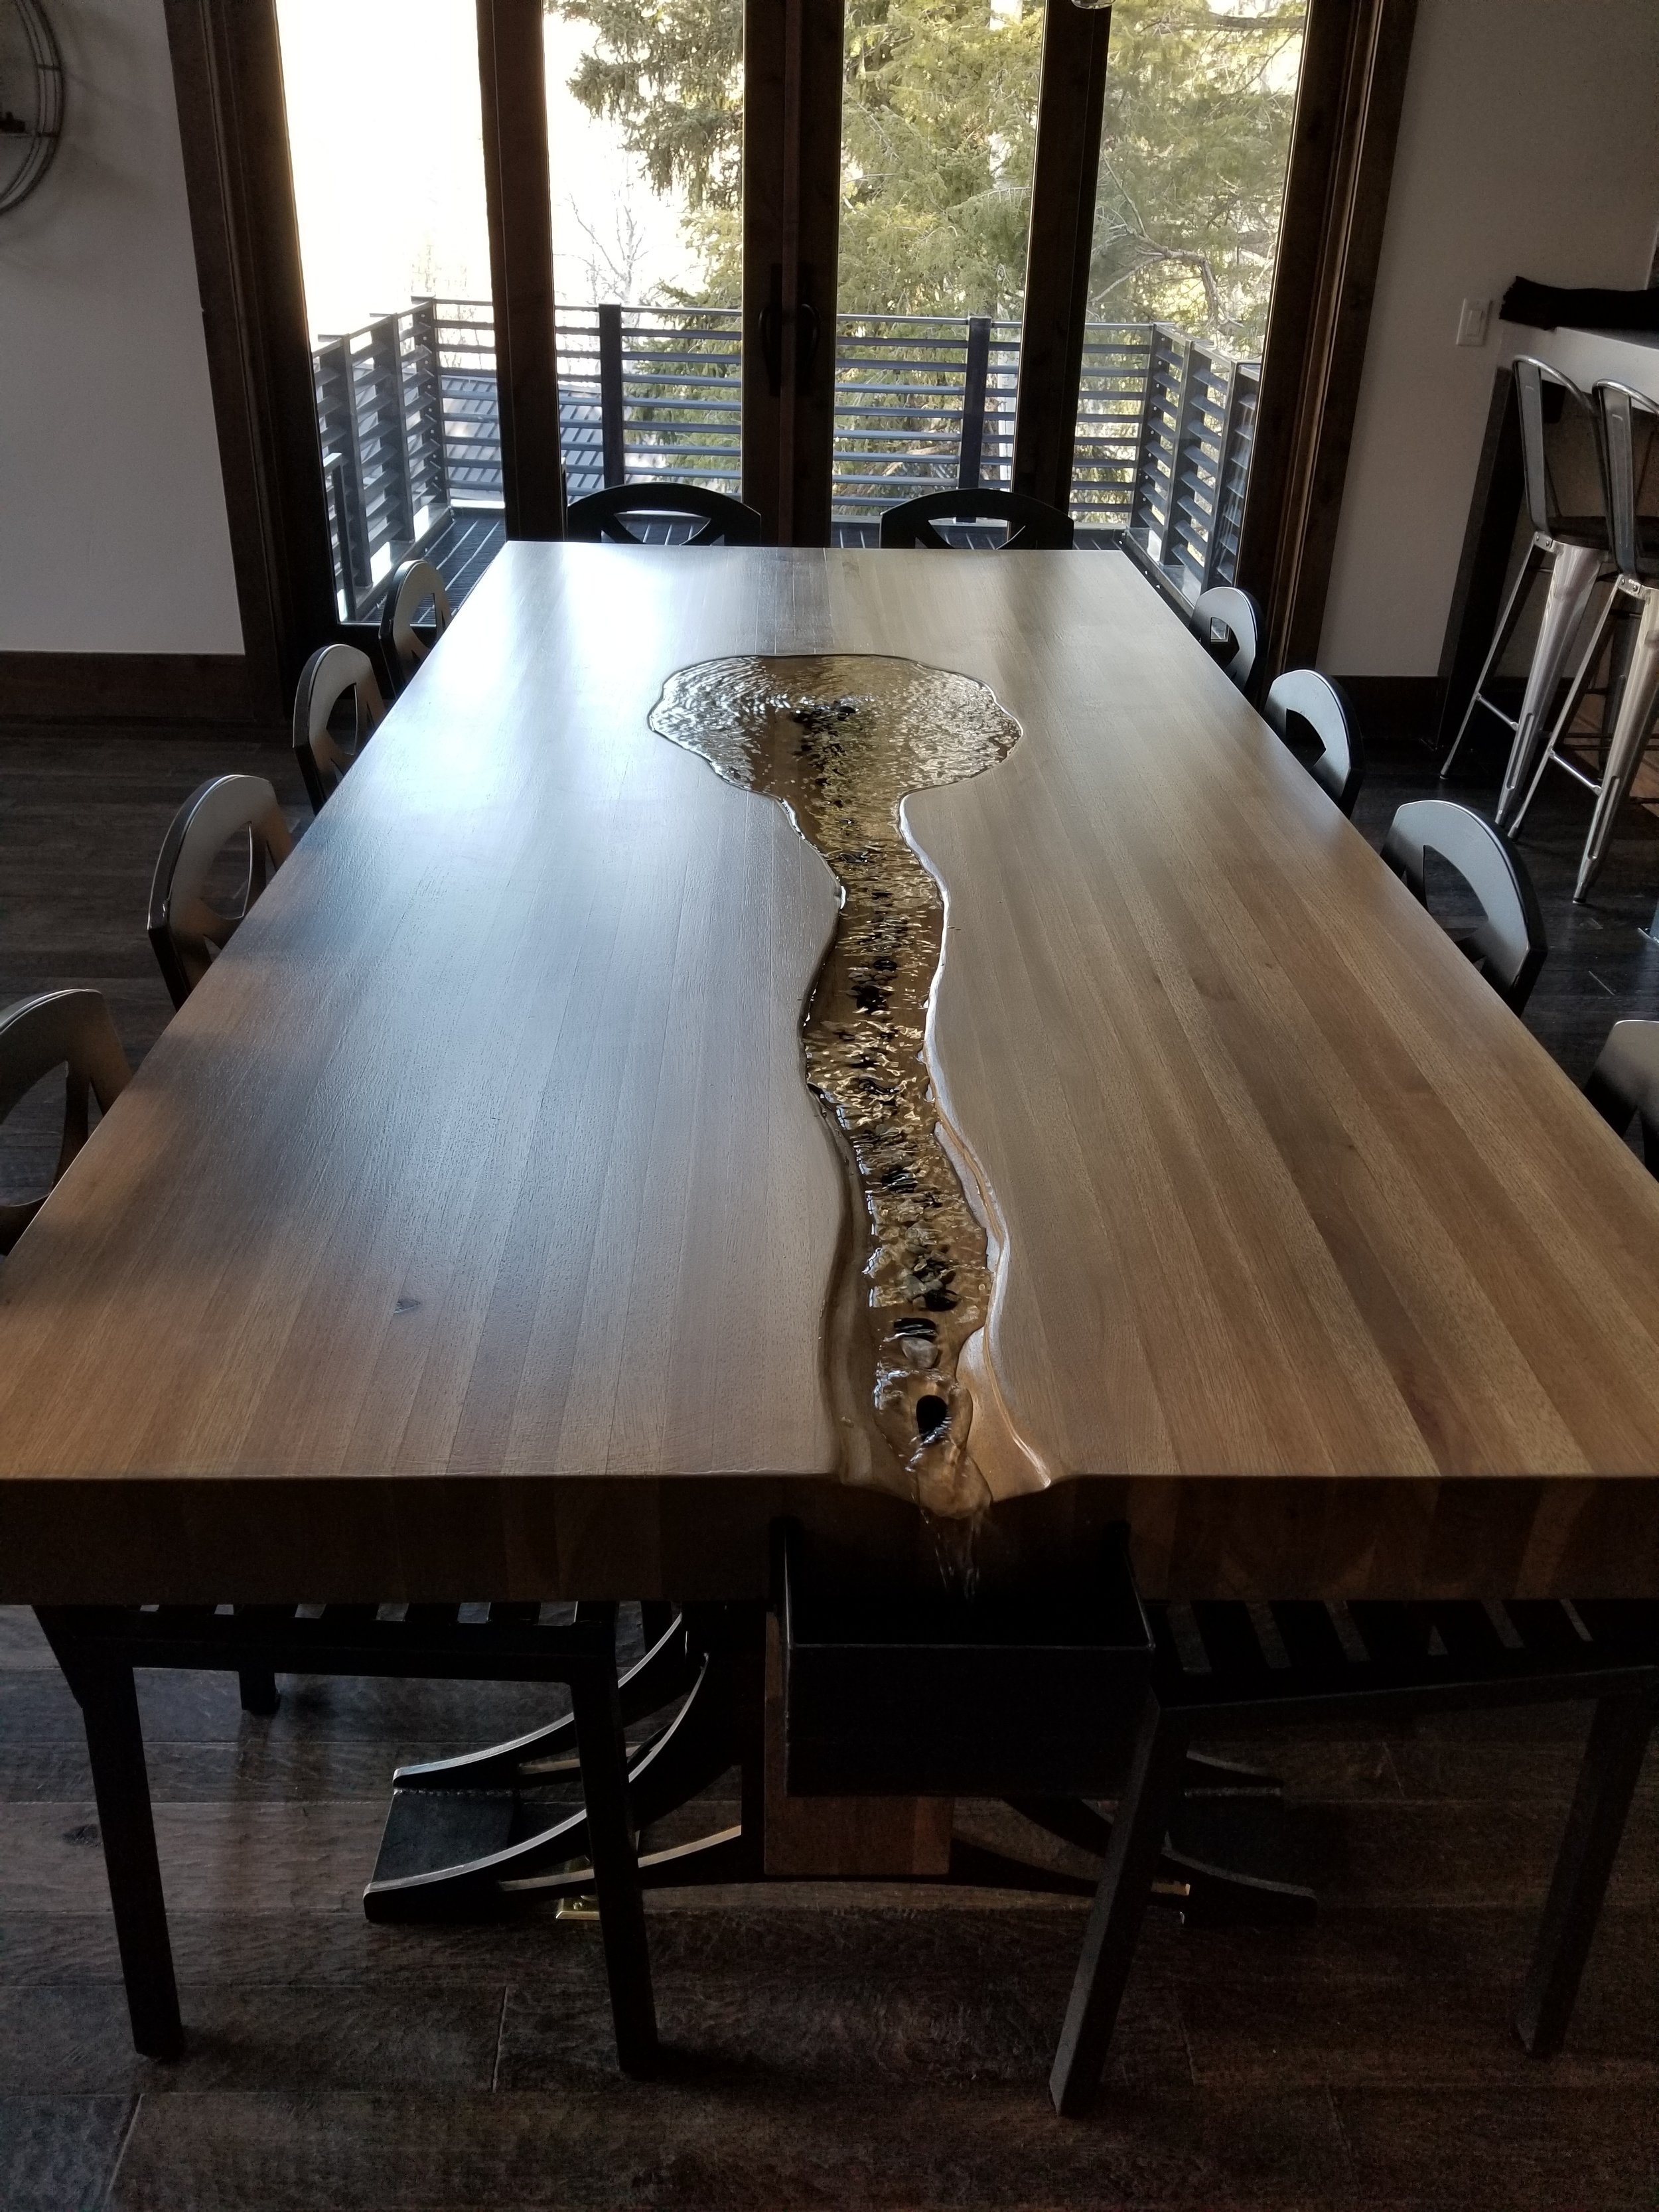 Table with water feature